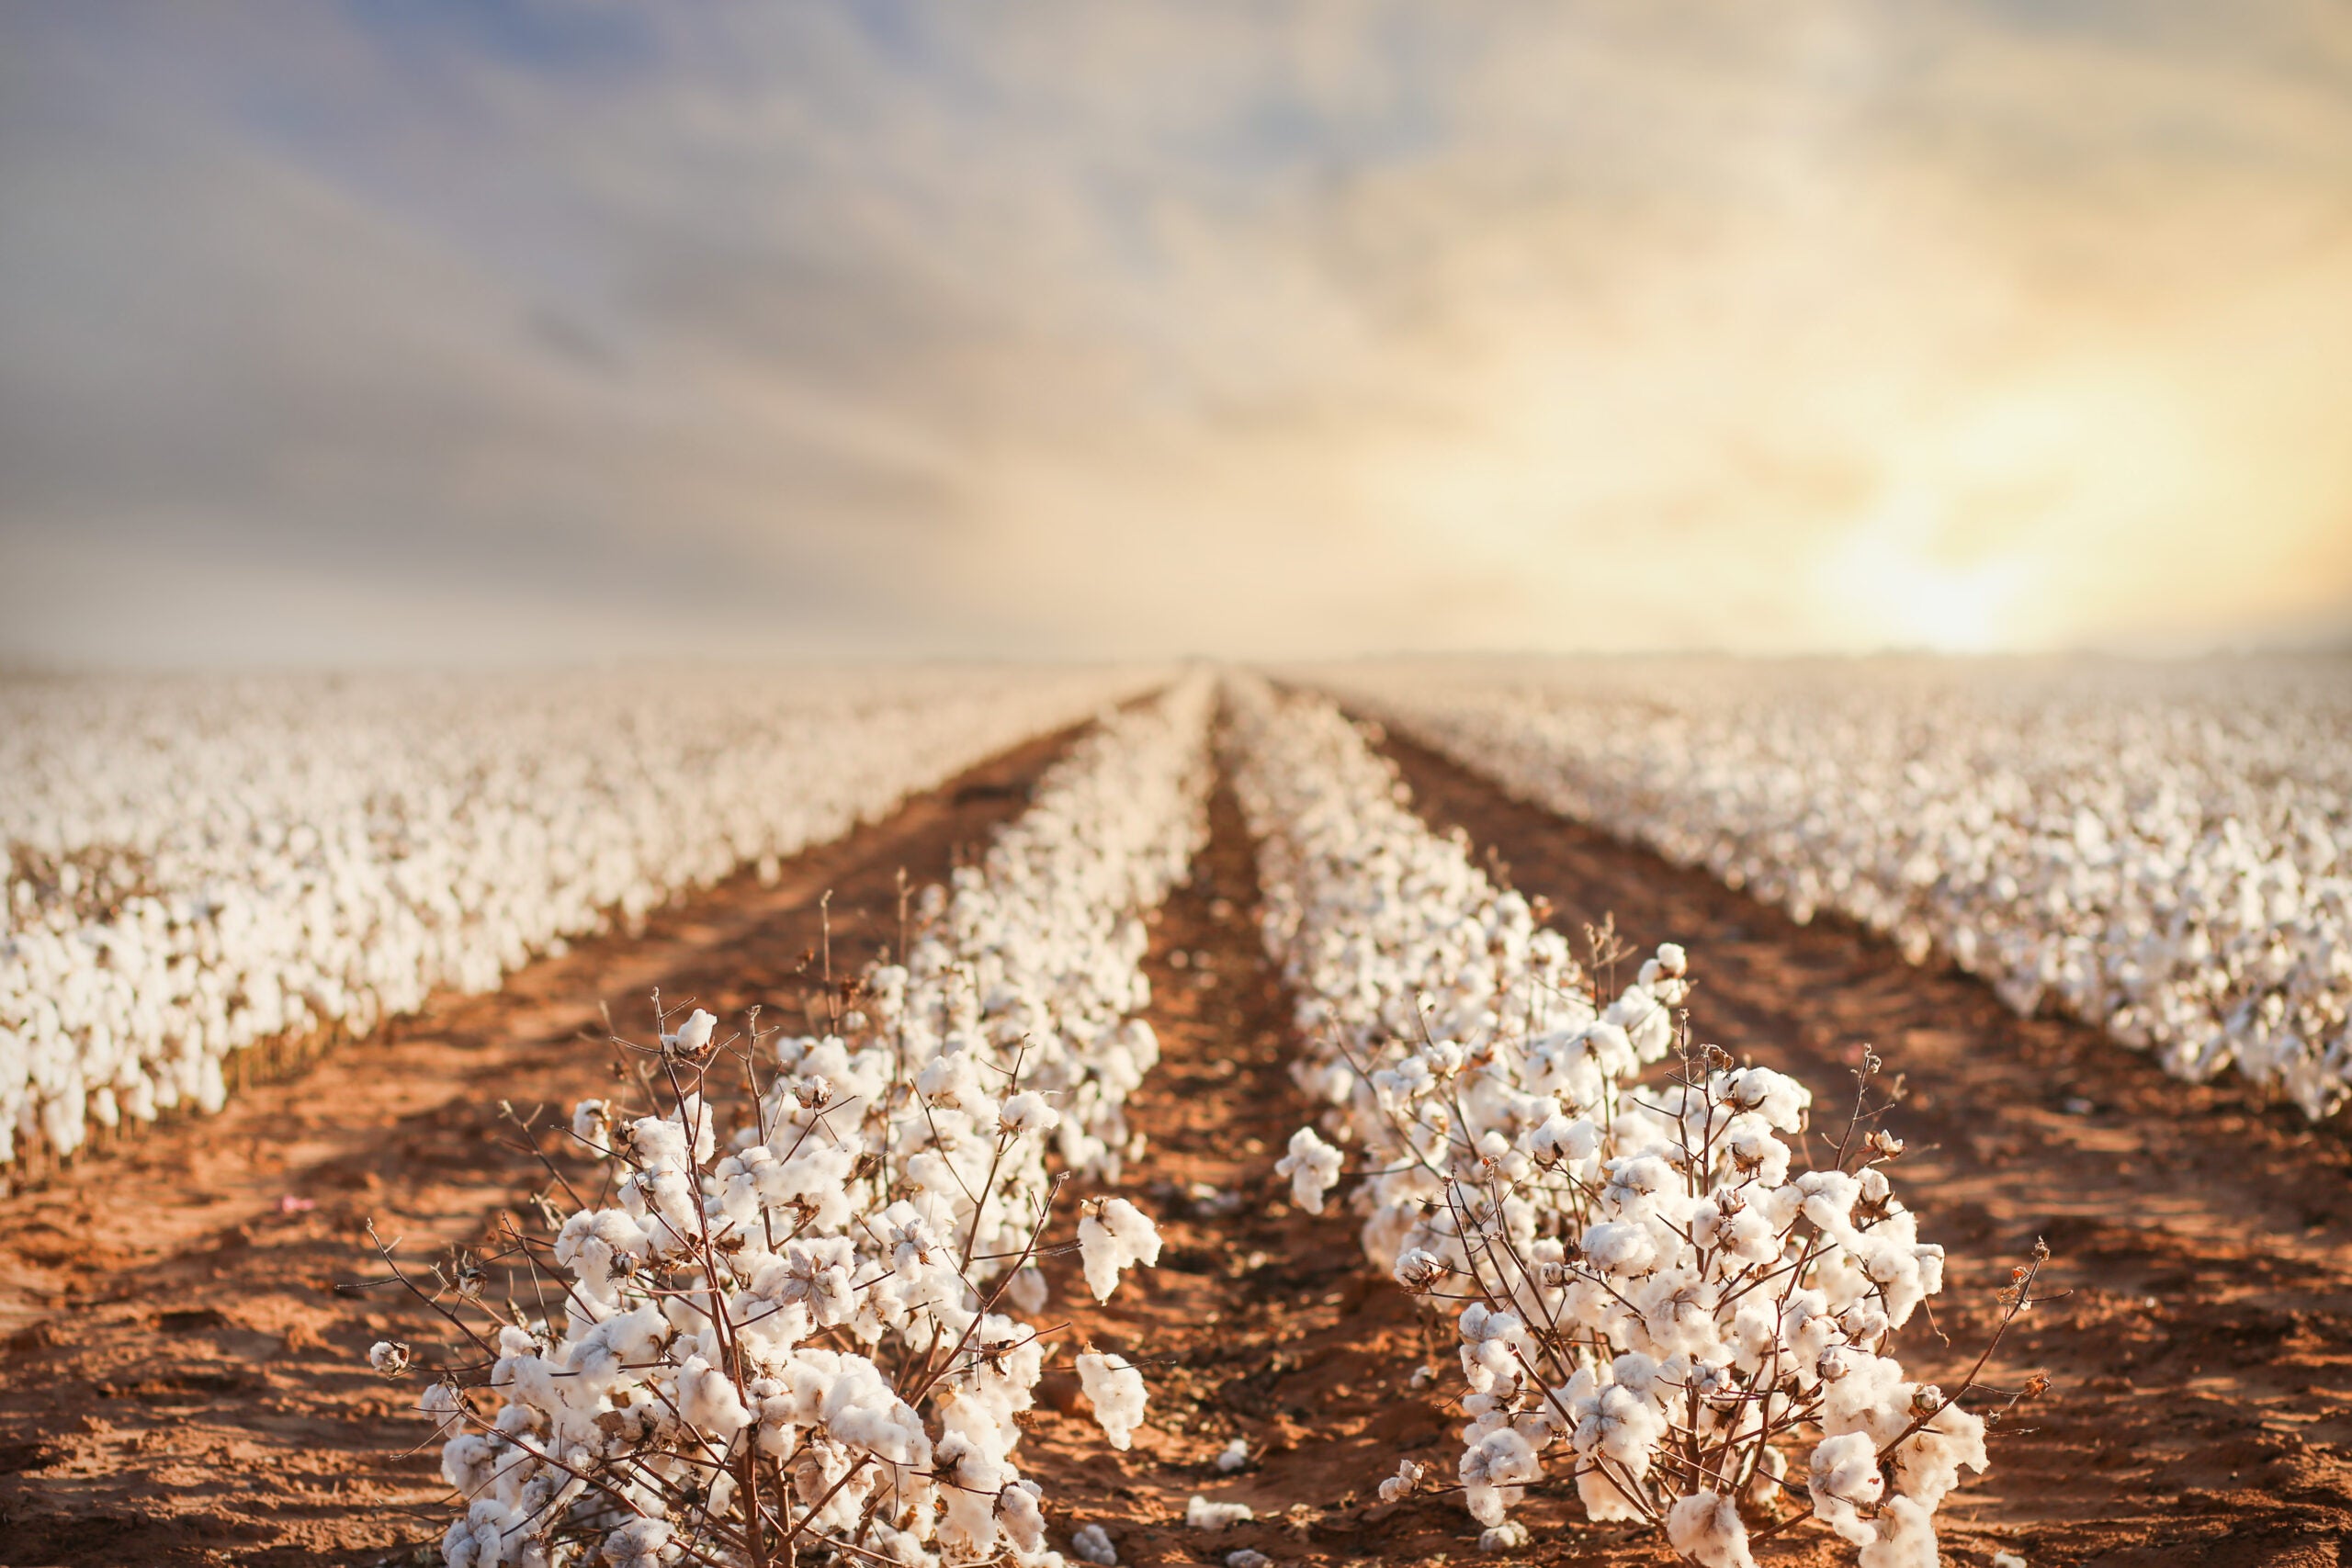 Rare period of stability in an up-and-down cotton season